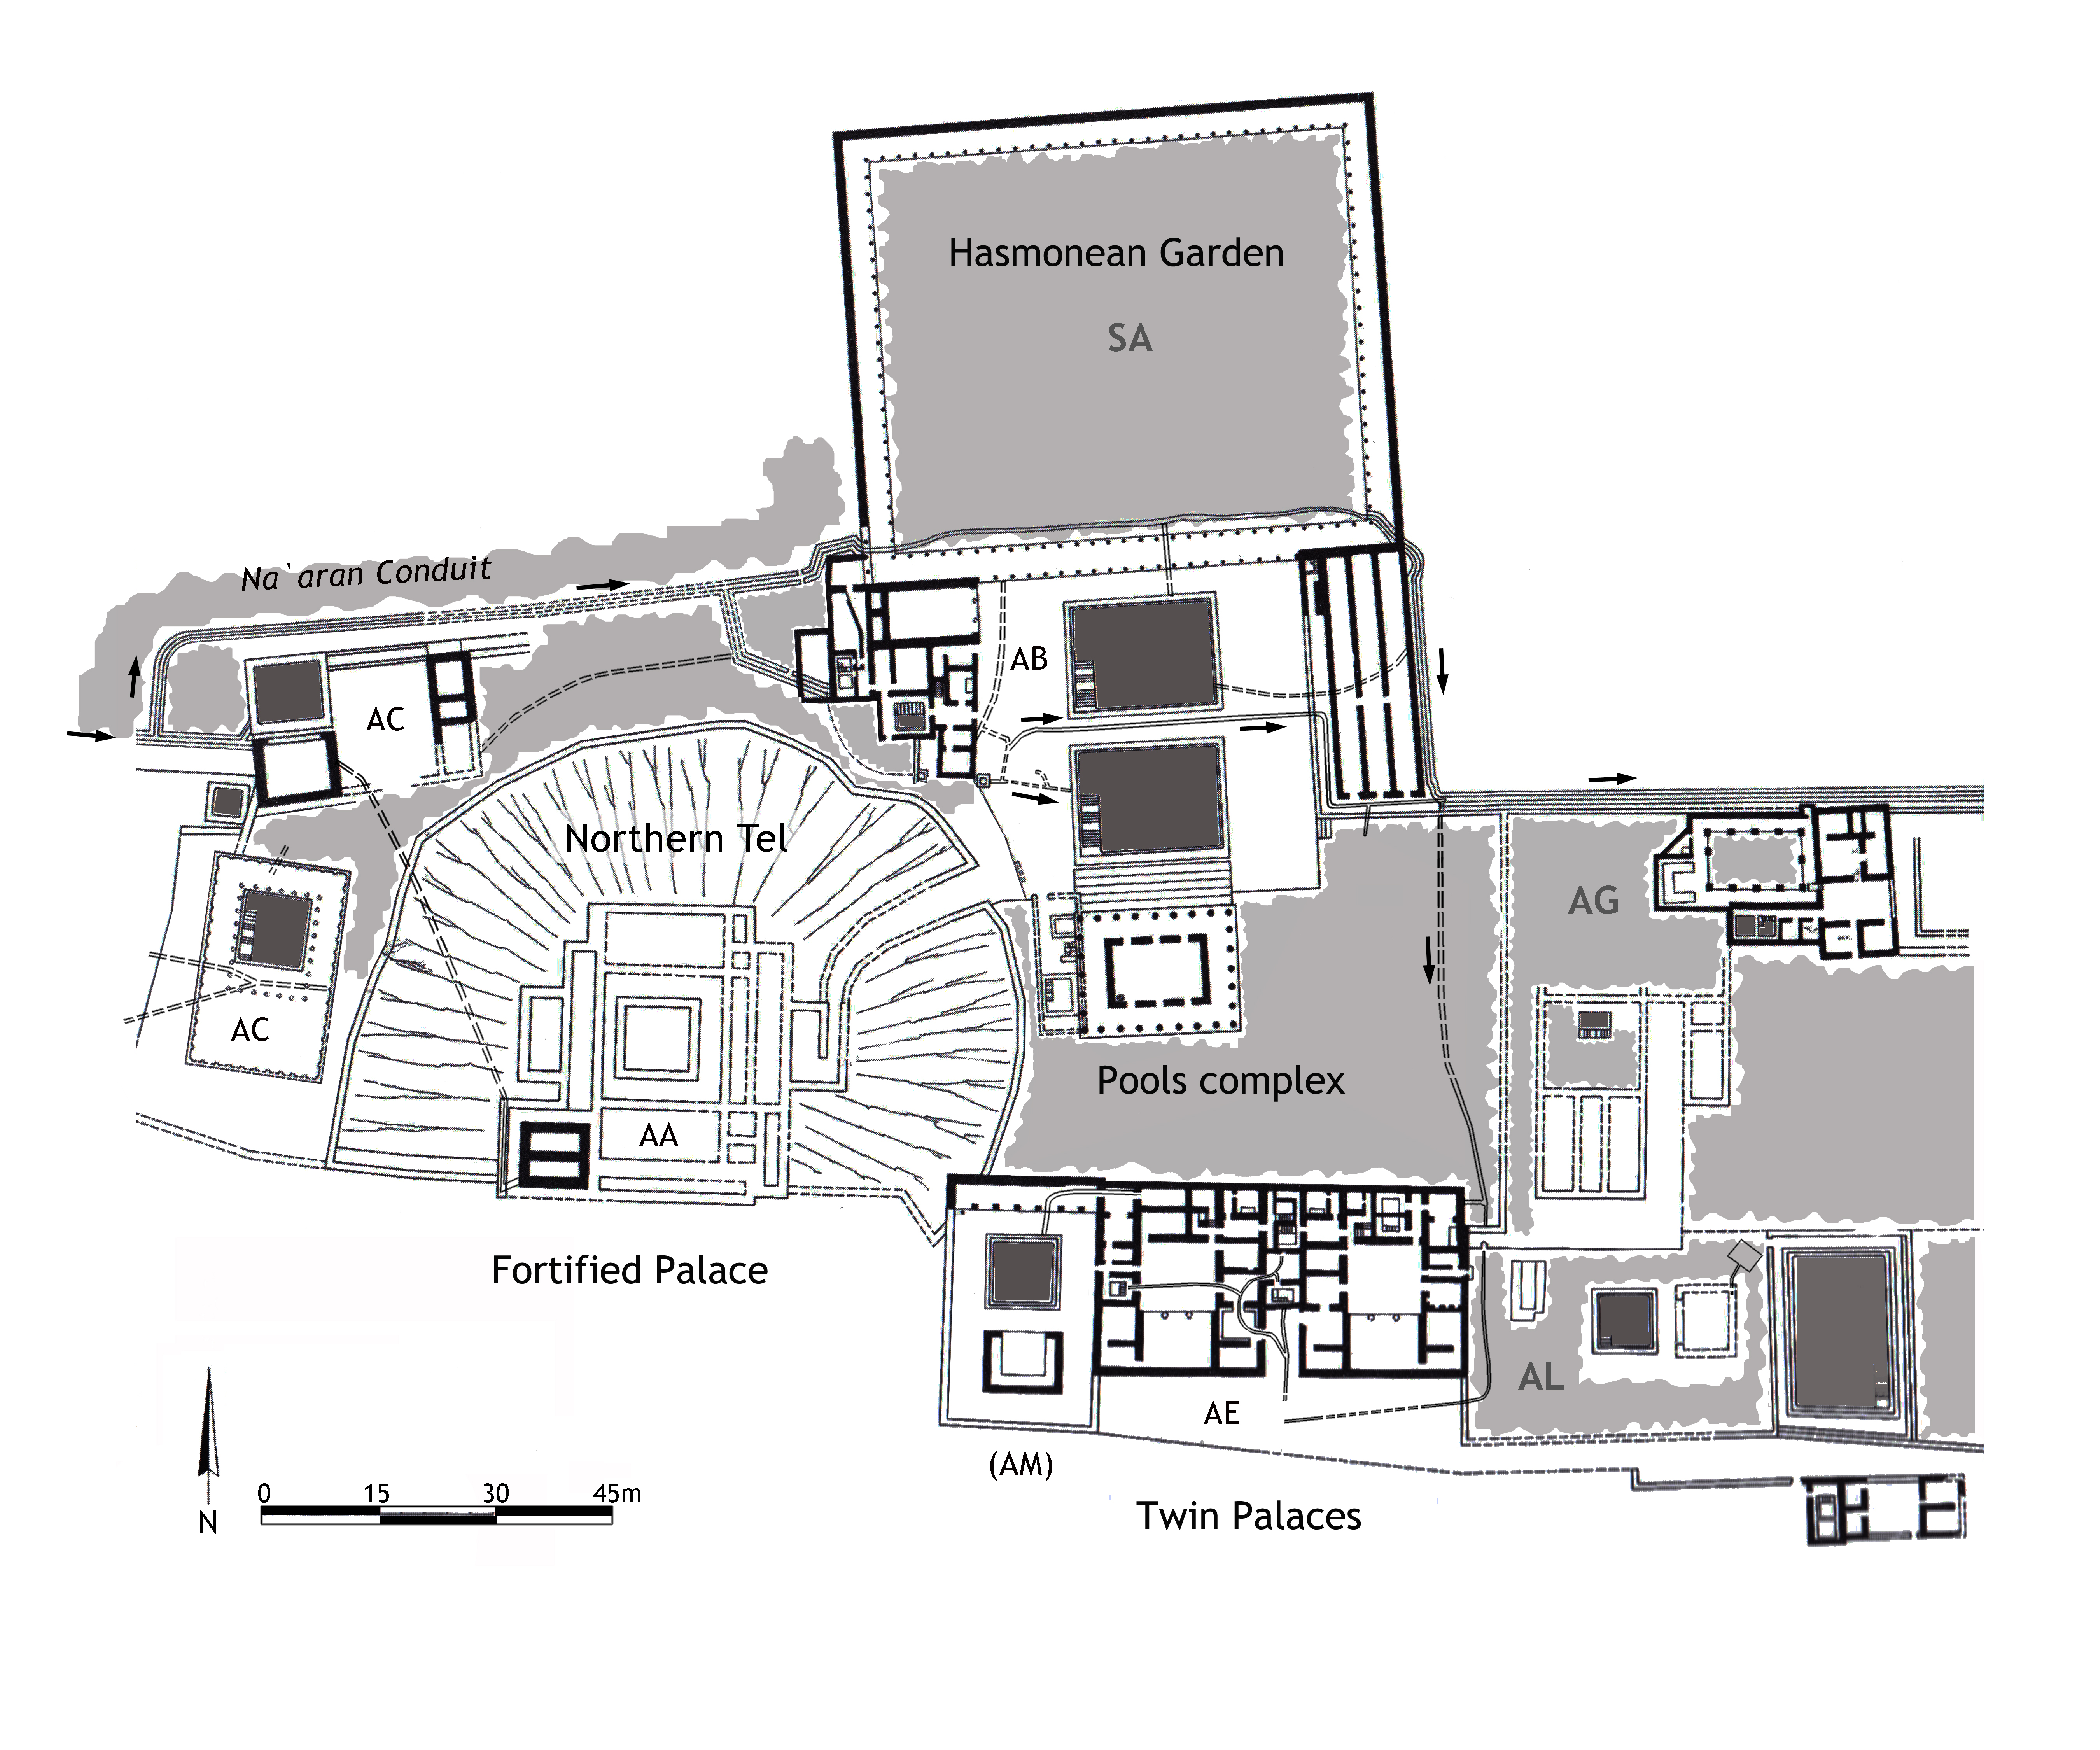 Figure 3:Plan of the later Hasmonean palaces and their gardens. Light gray shading indicates gardens, dark gray shading indicates pools (Gleason after Netzer 2001a: Plan 8)